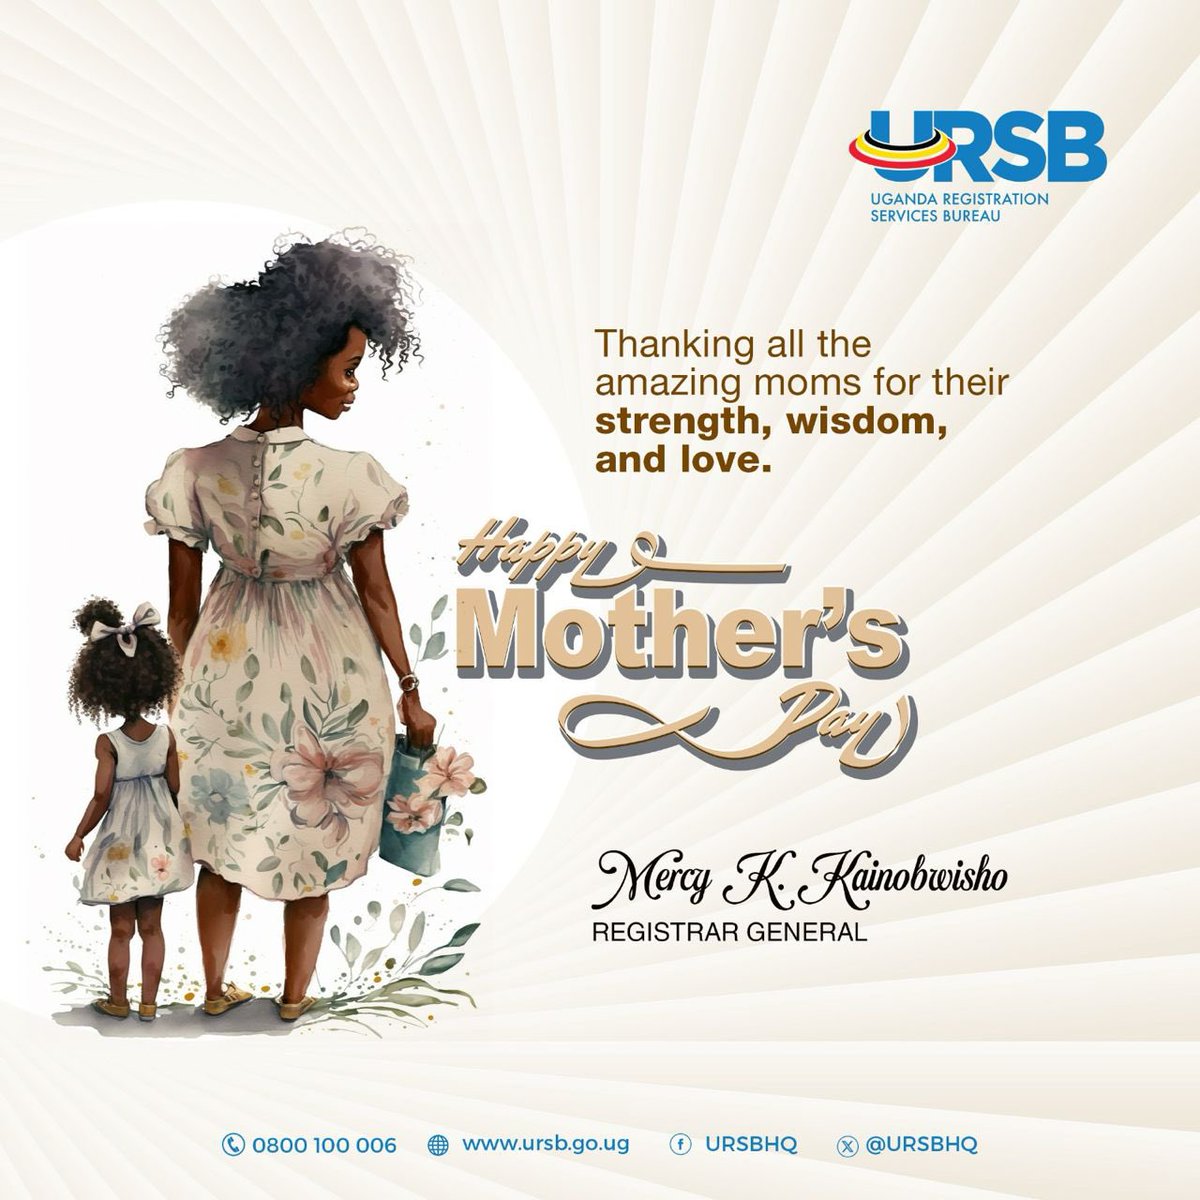 Wishing a happy Mother's Day to all mothers. You are always special.